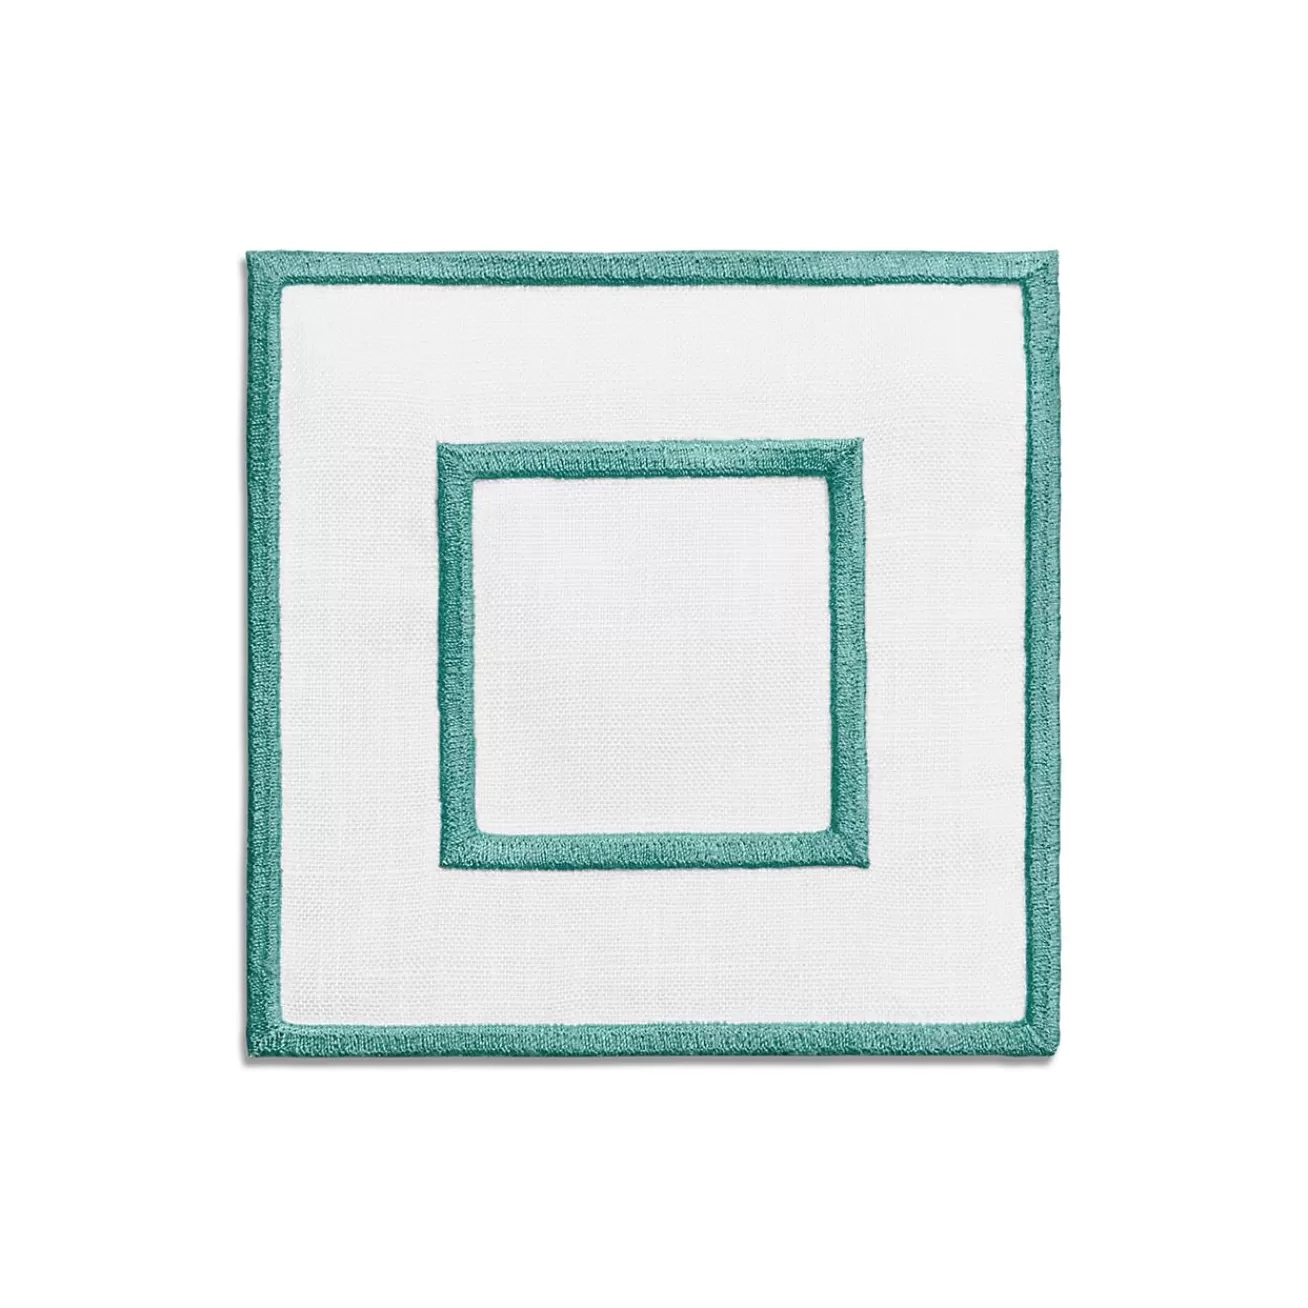 Tiffany & Co. Tiffany Home Essentials Embroidered Coasters in Linen, Set of Four | ^ Tiffany Blue® Gifts | Decor